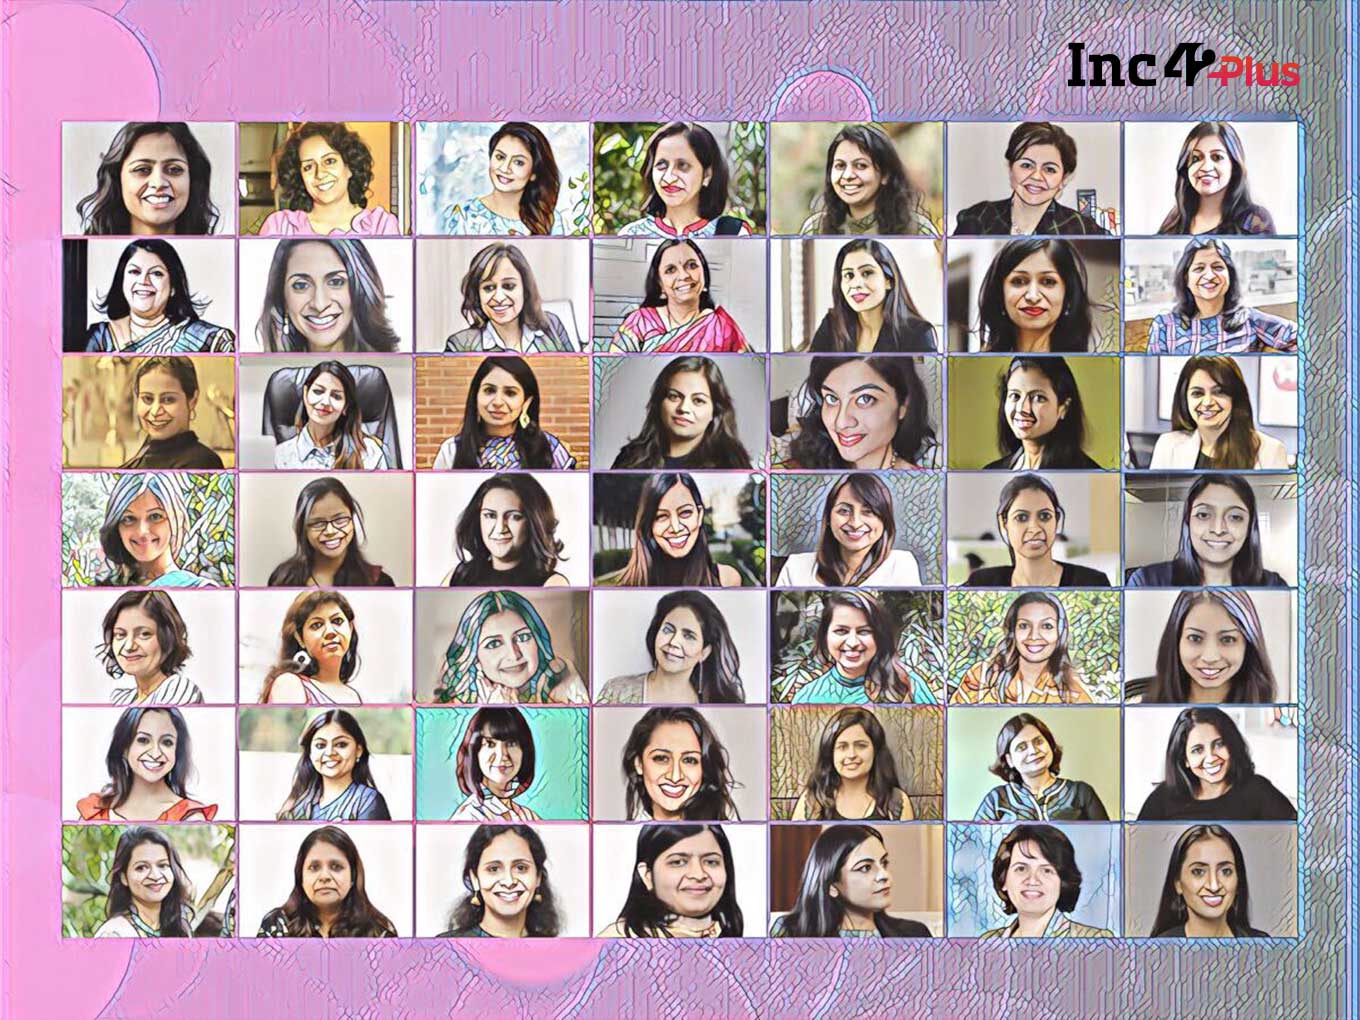 [The Outline By Inc42 Plus] Women-Led Startups. Still A Distant Dream?